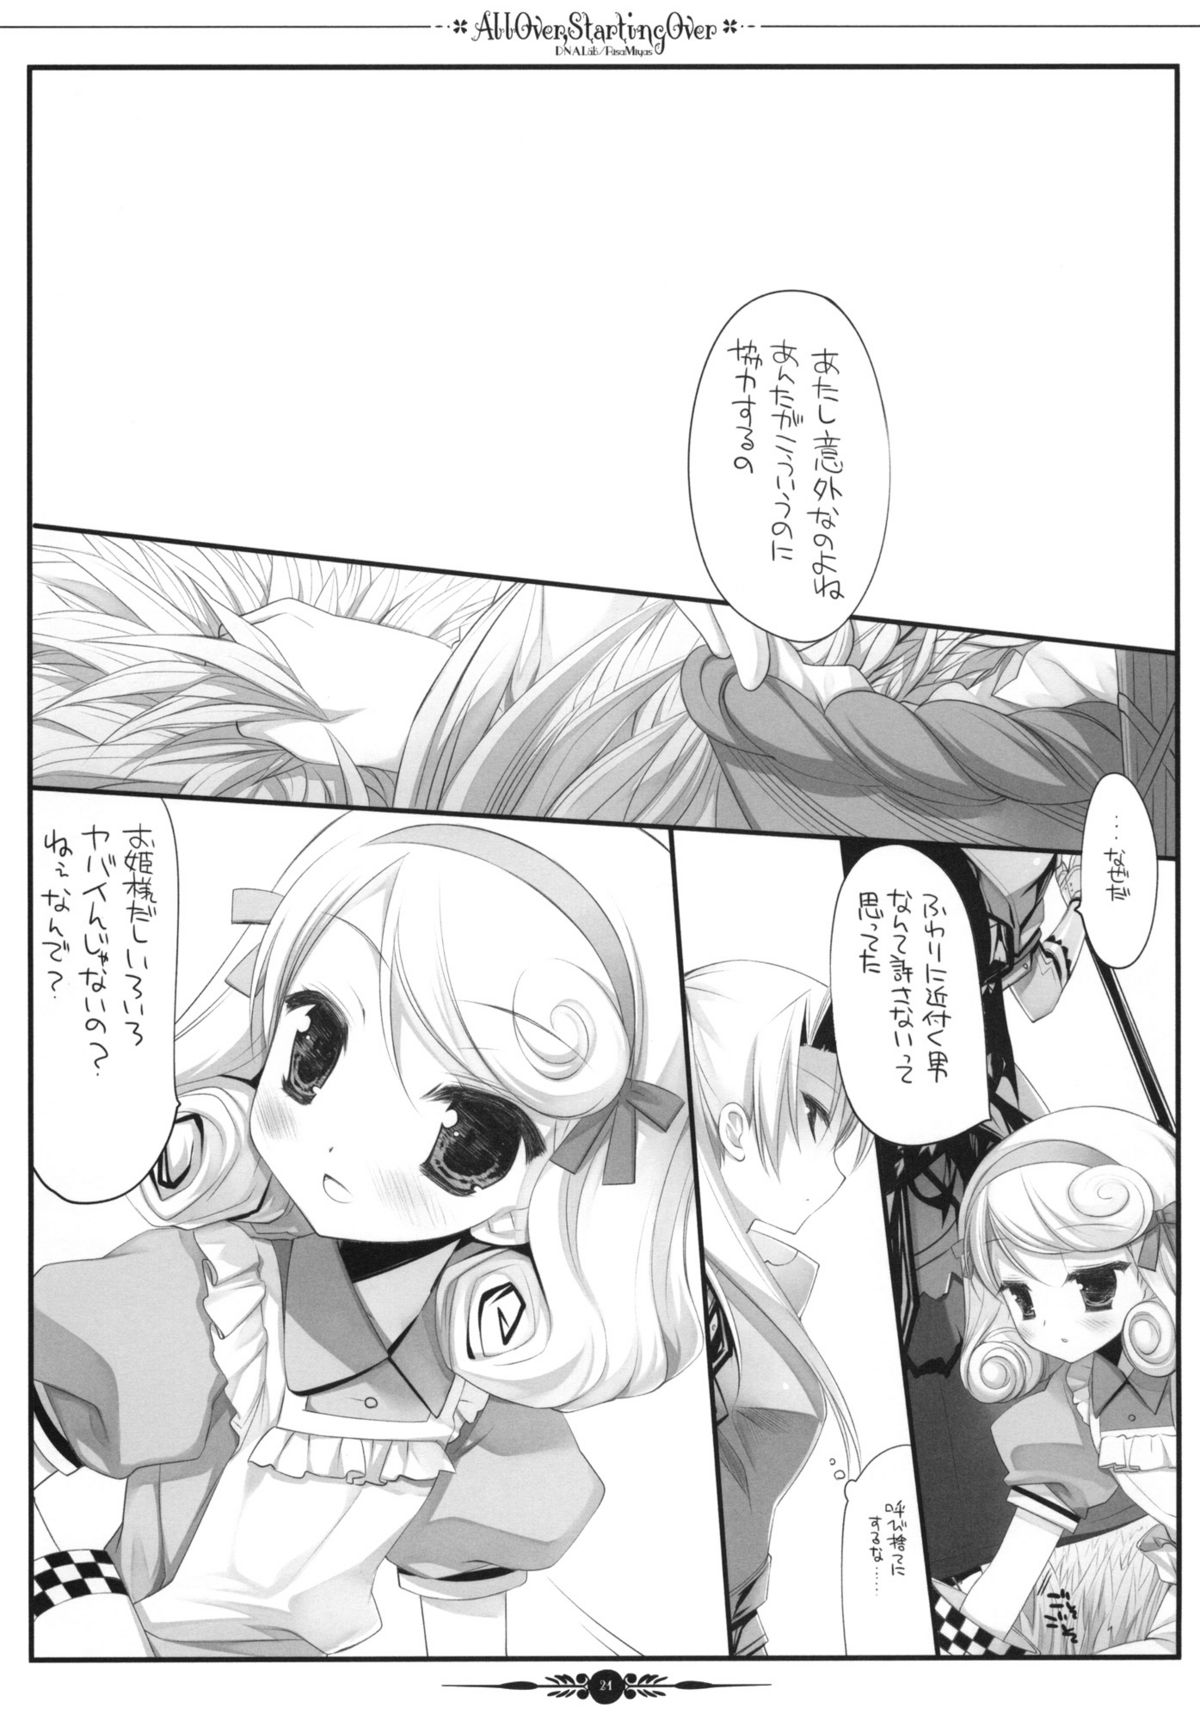 (COMIC1☆4) [D･N･A.Lab. (ミヤスリサ)] All Over, Starting Over (世界樹の迷宮 3)